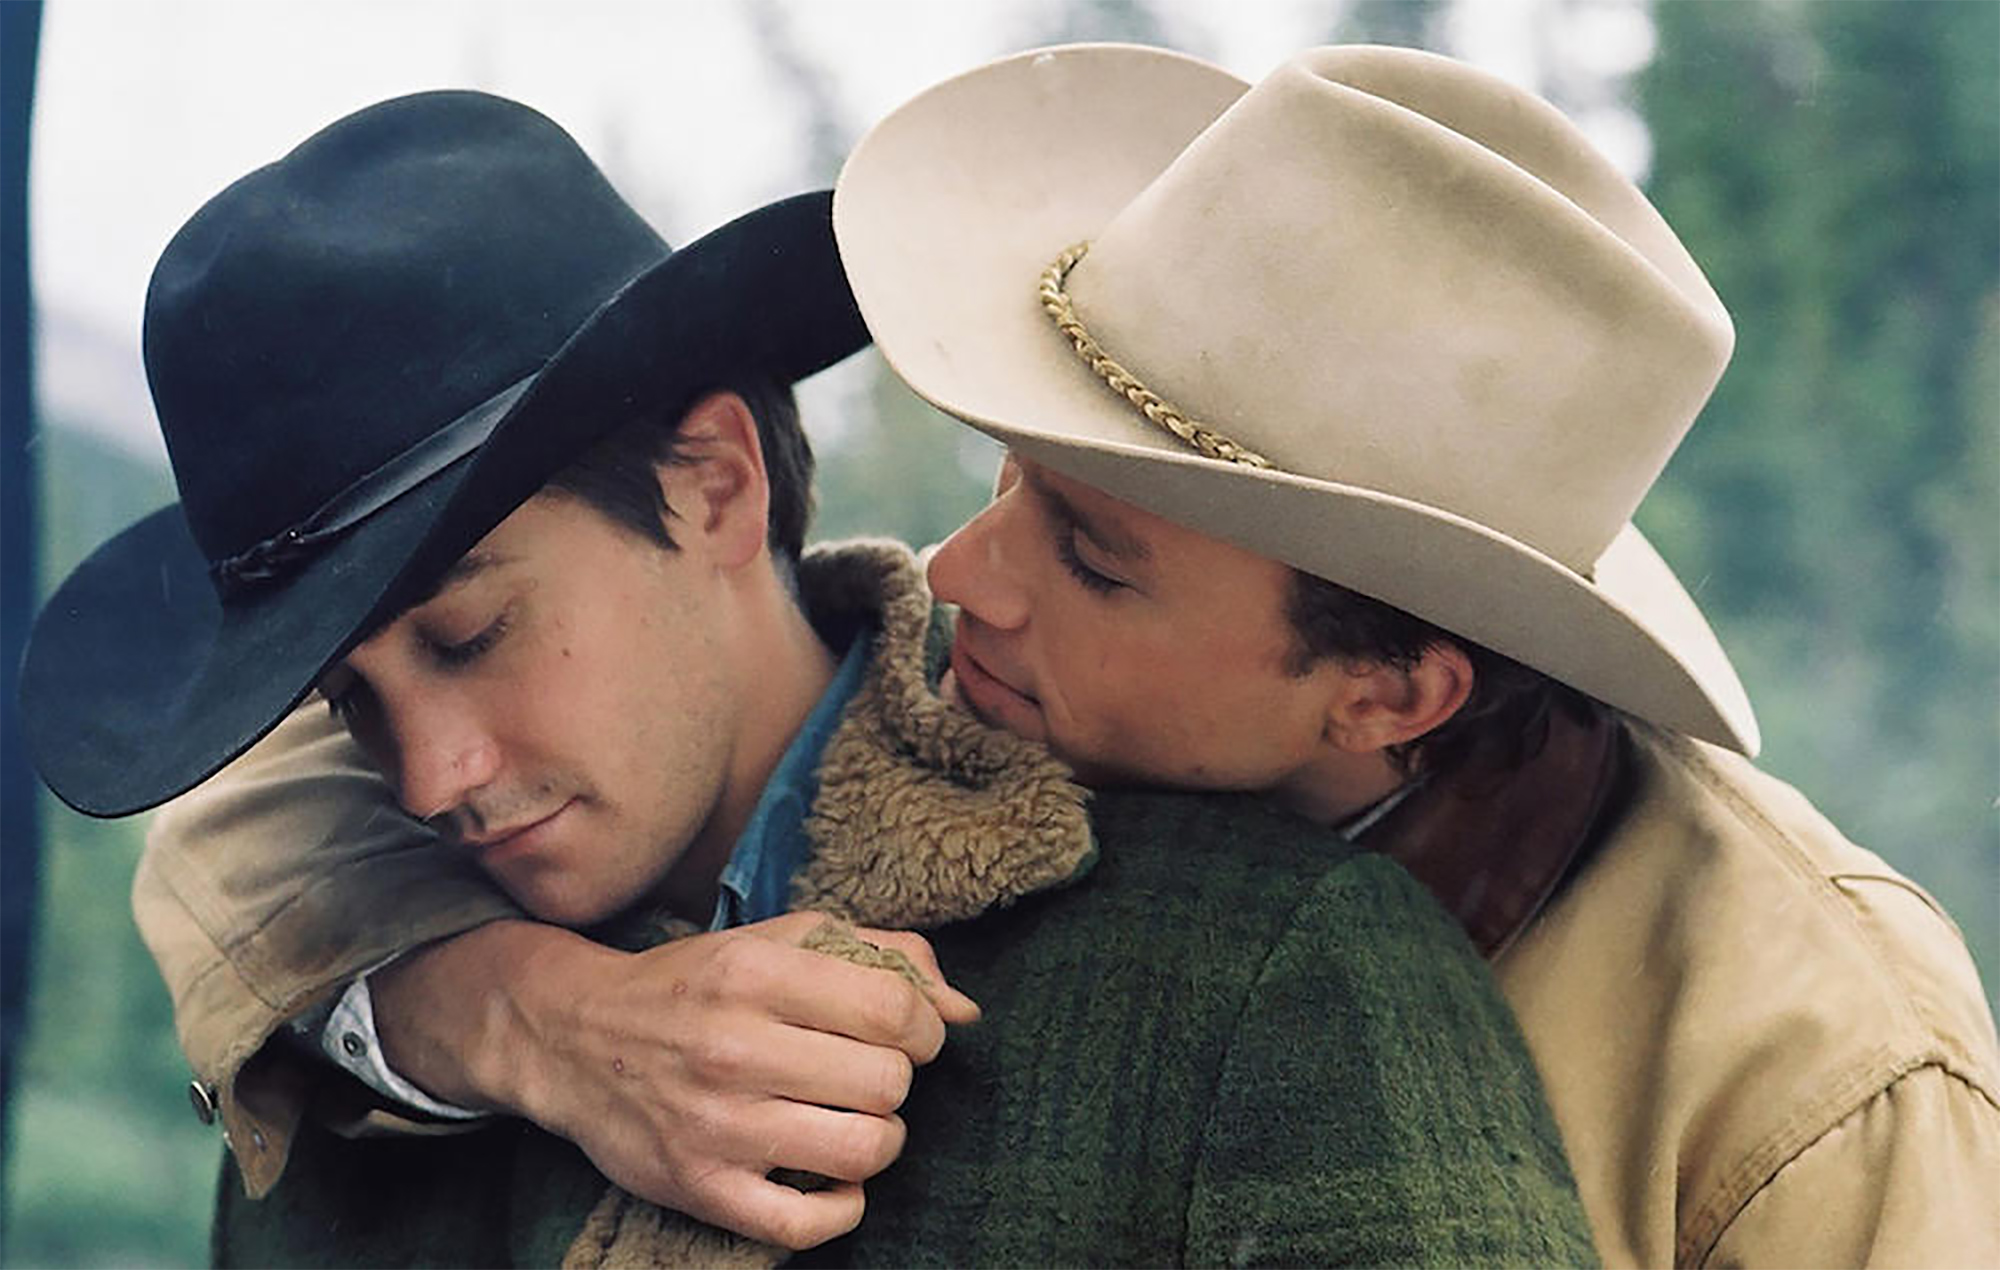 BROKEBACK MOUNTAIN USA 2005 Ang Lee The two Cowboys Jack Twist (JAKE GYLLENHAAL) and Ennis Del Mar (HEATH LEDGER) in a romantic scene. Regie: Ang Lee. Image shot 2005. Exact date unknown.